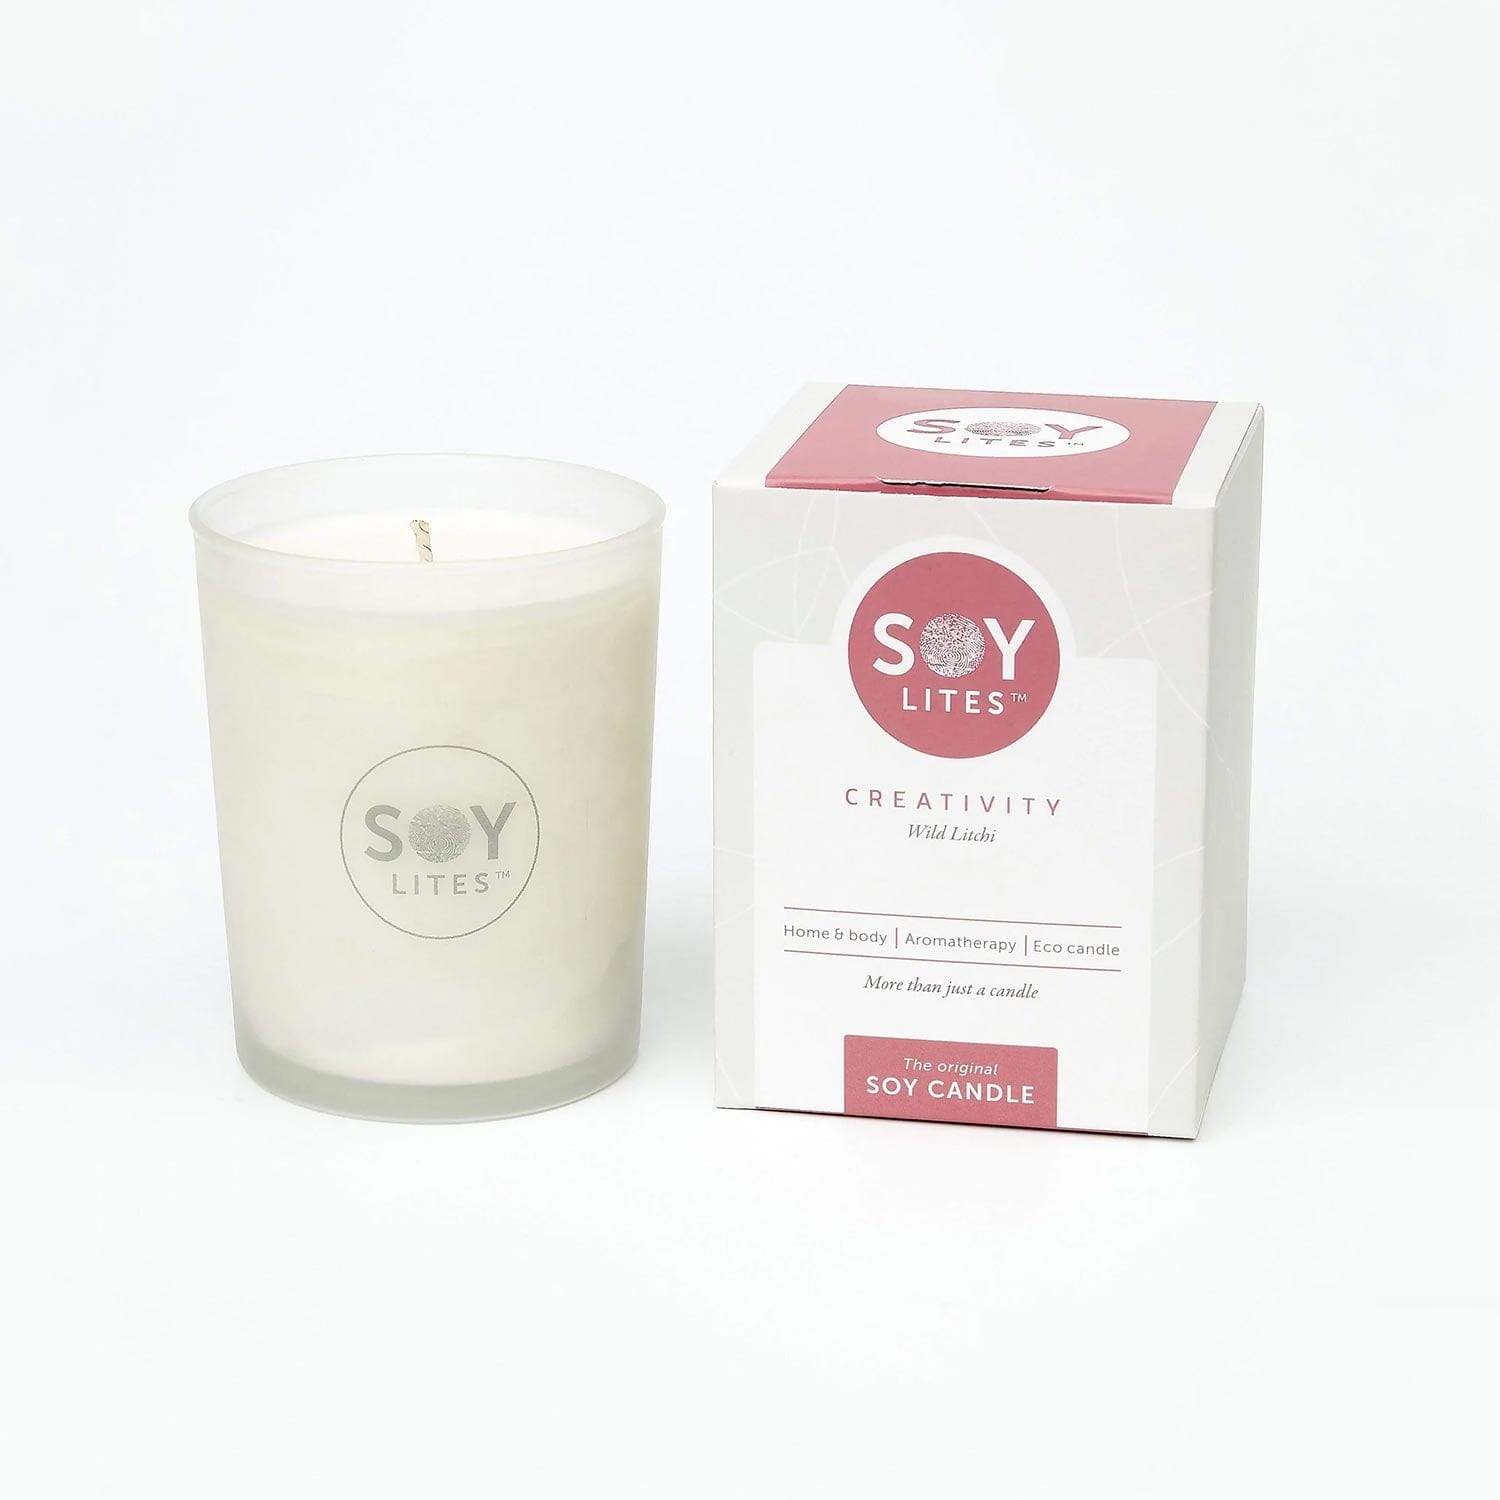 SoyLites 'Creativity' Soy Candle with Litchi Candles SoyLites 